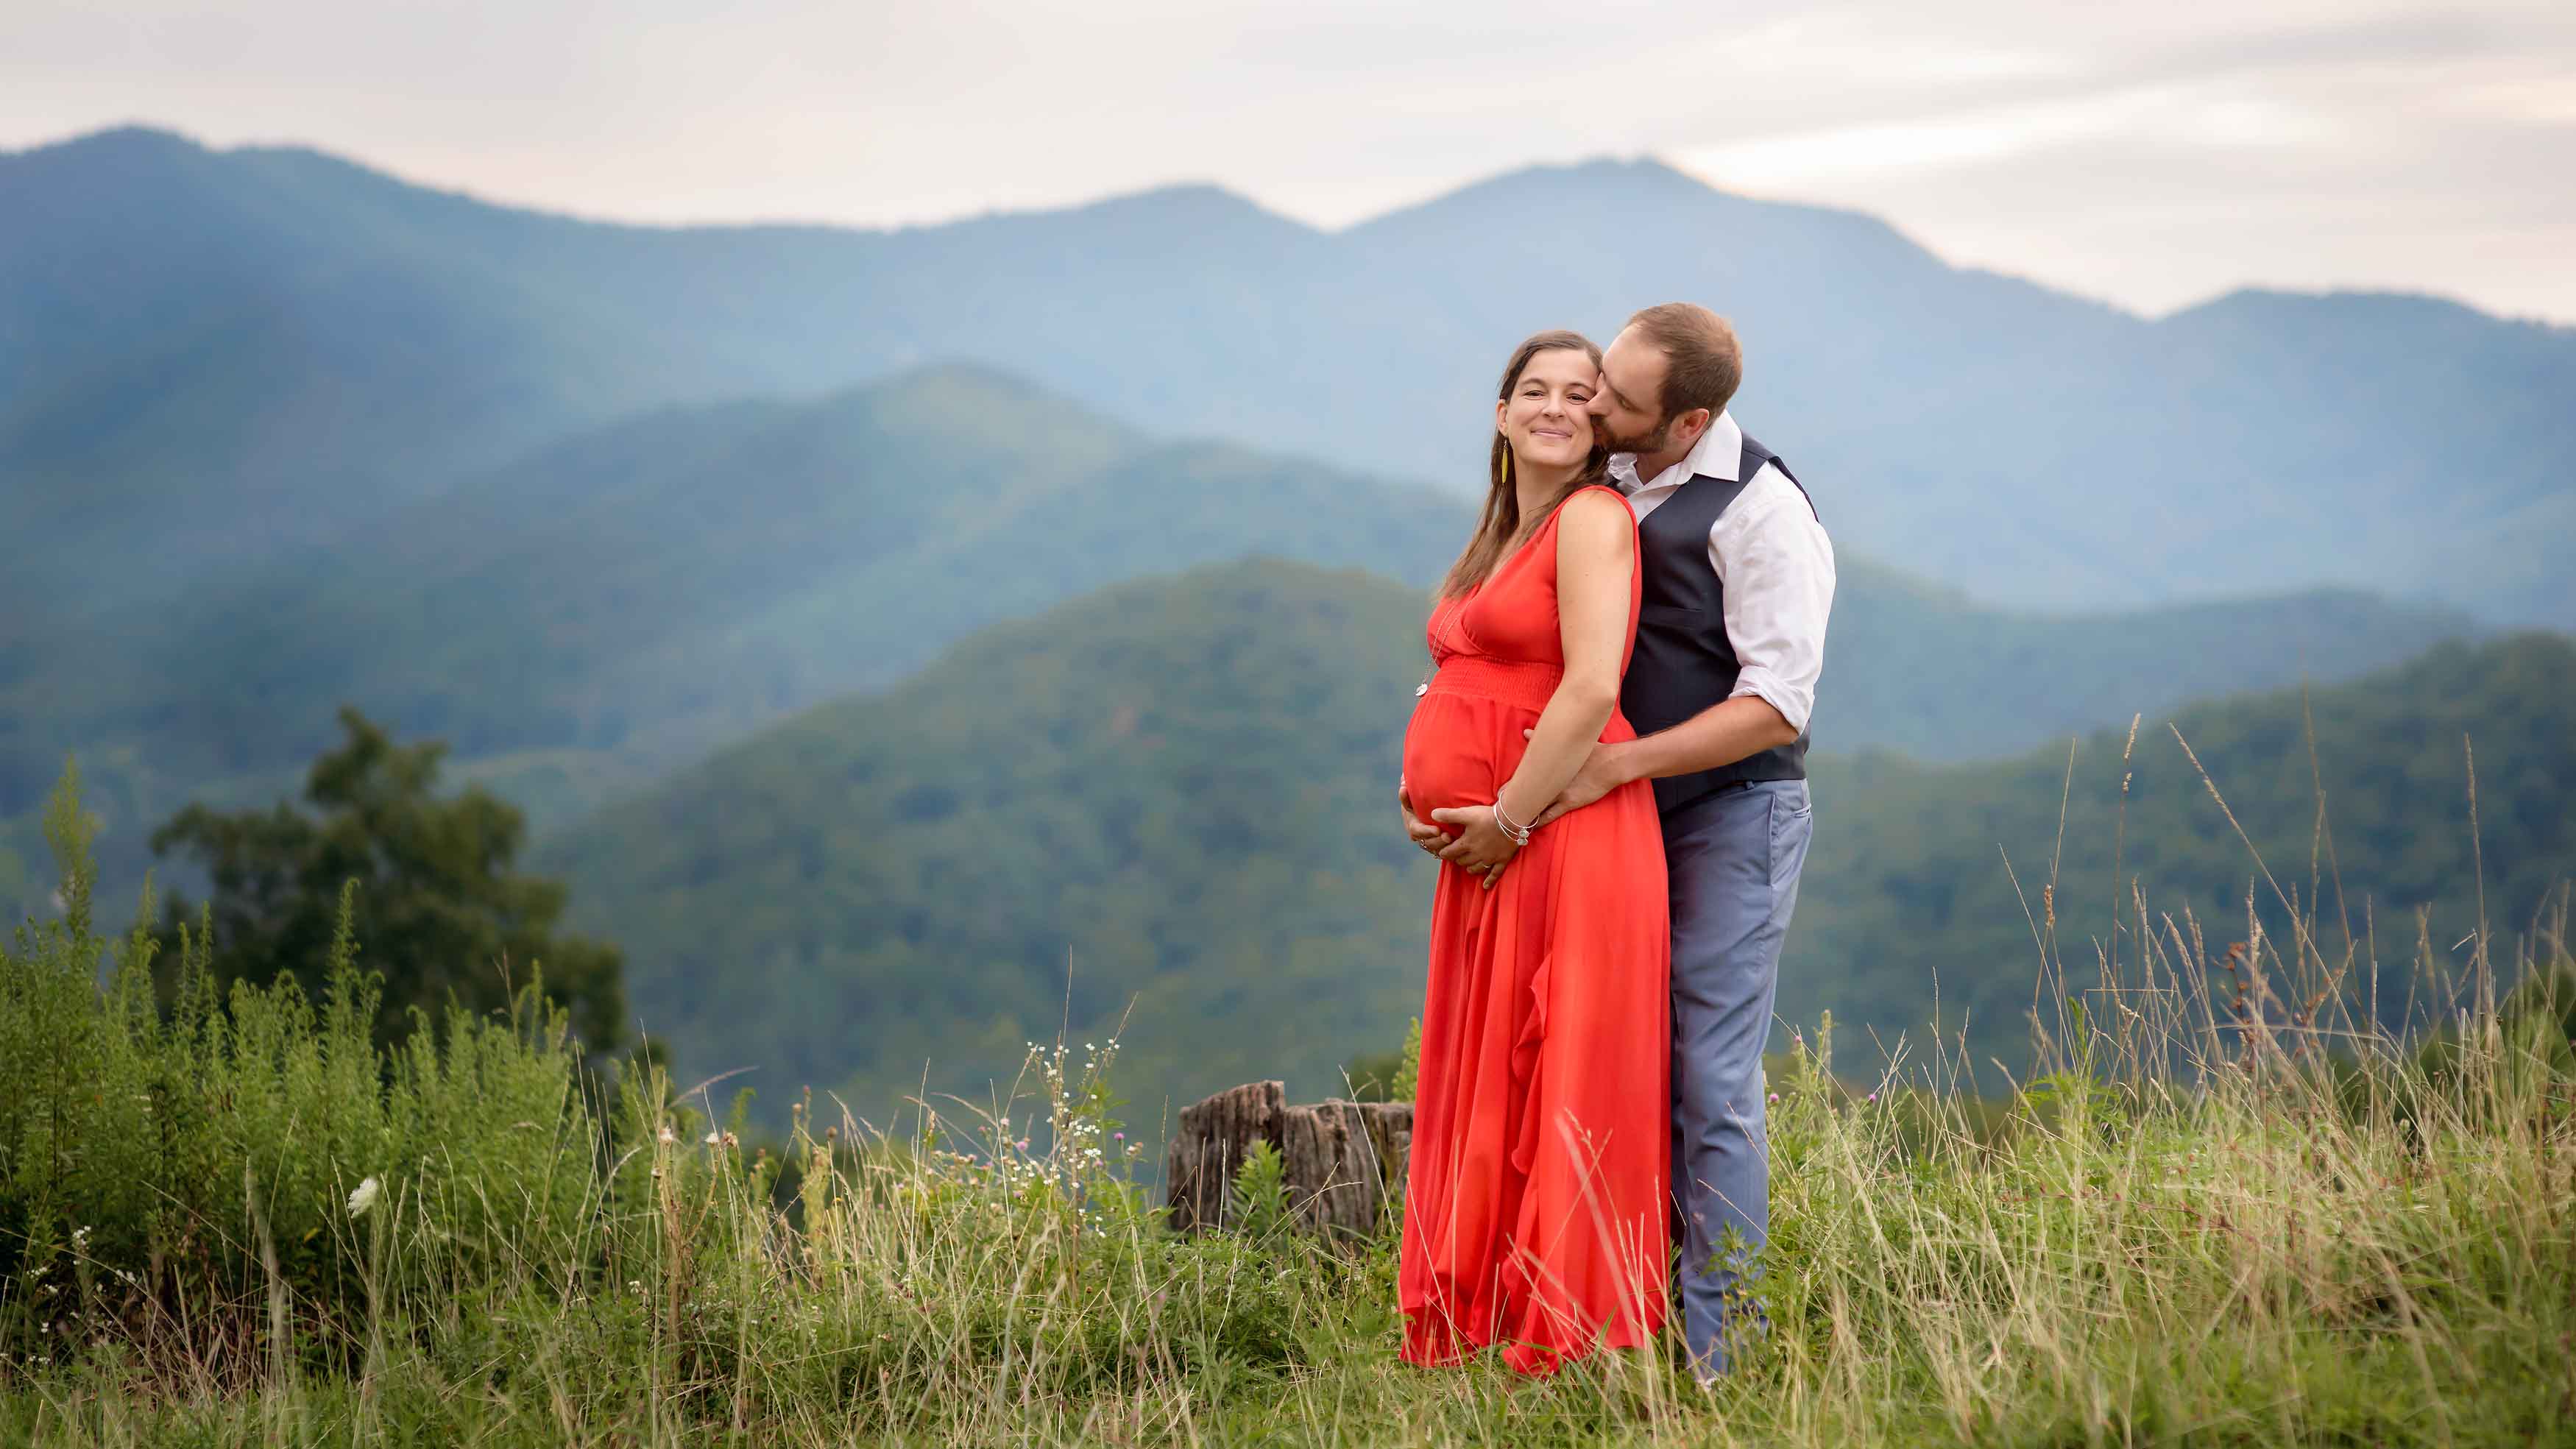 Maternity photography in Asheville with mountains in the background.